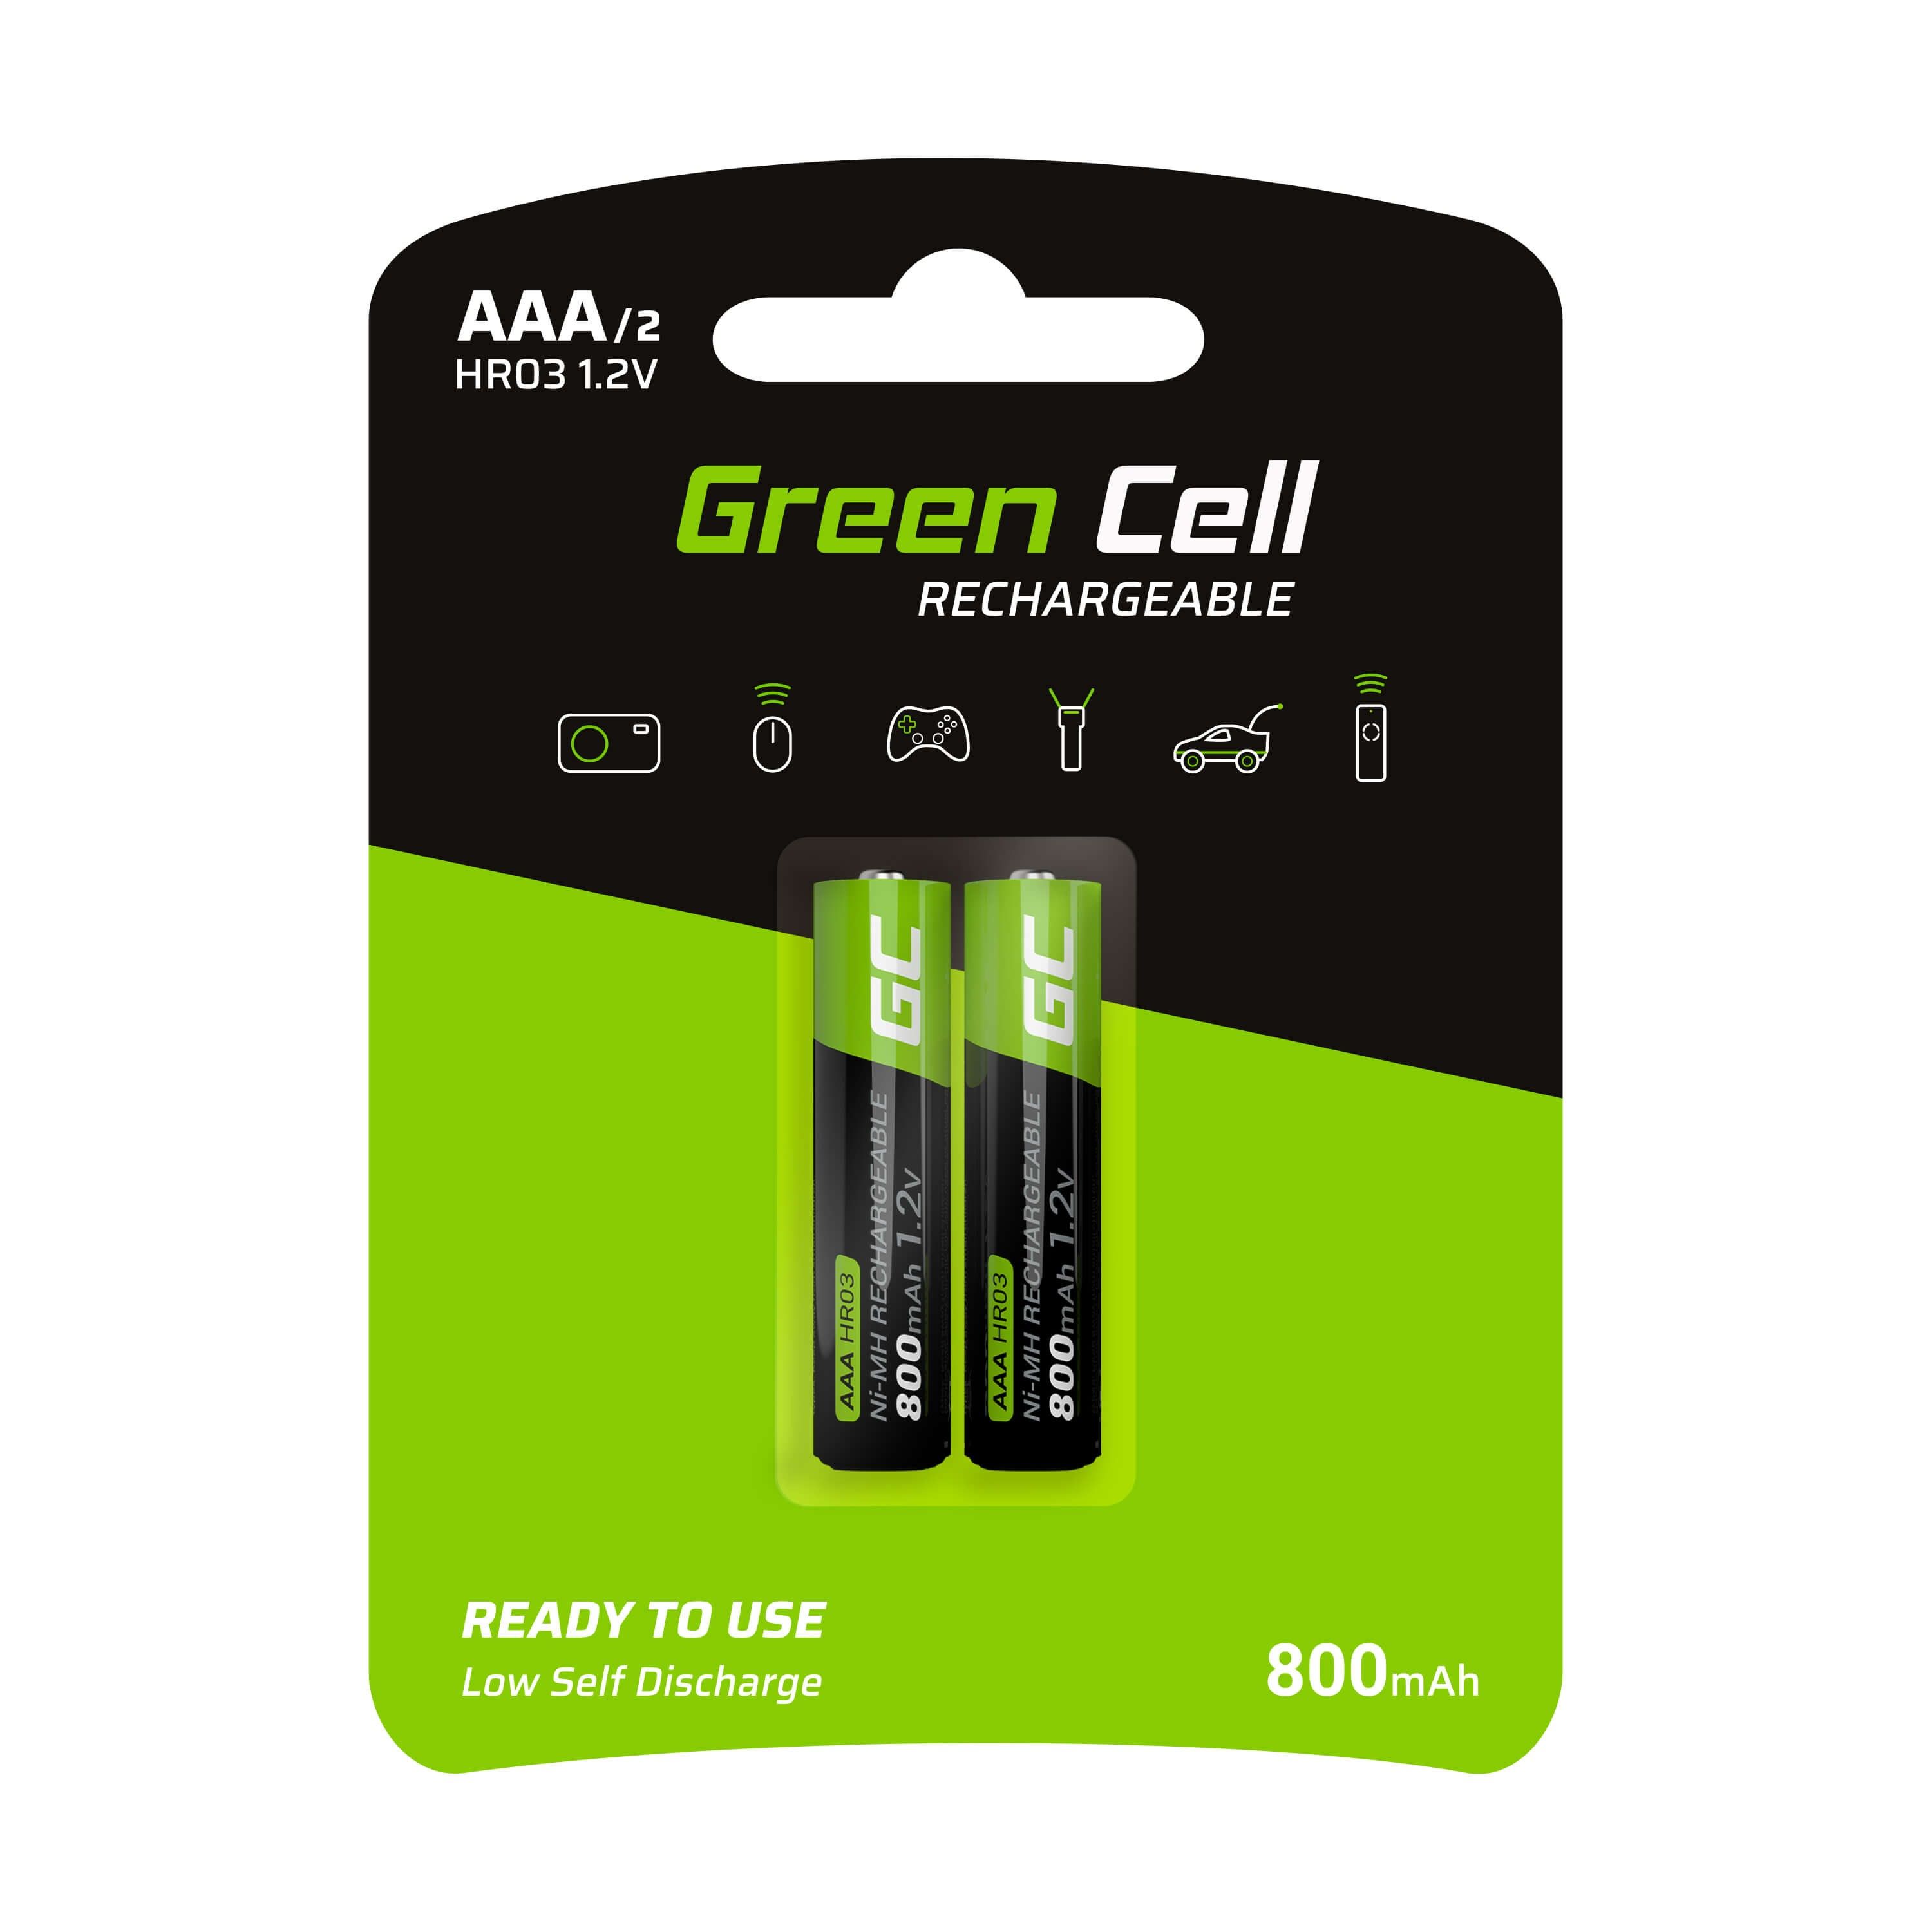 Green Cell GR08 household battery Rechargeable battery AAA Nickel-Metal Hydride (NiMH) 2X AAA R3 800MAH_1